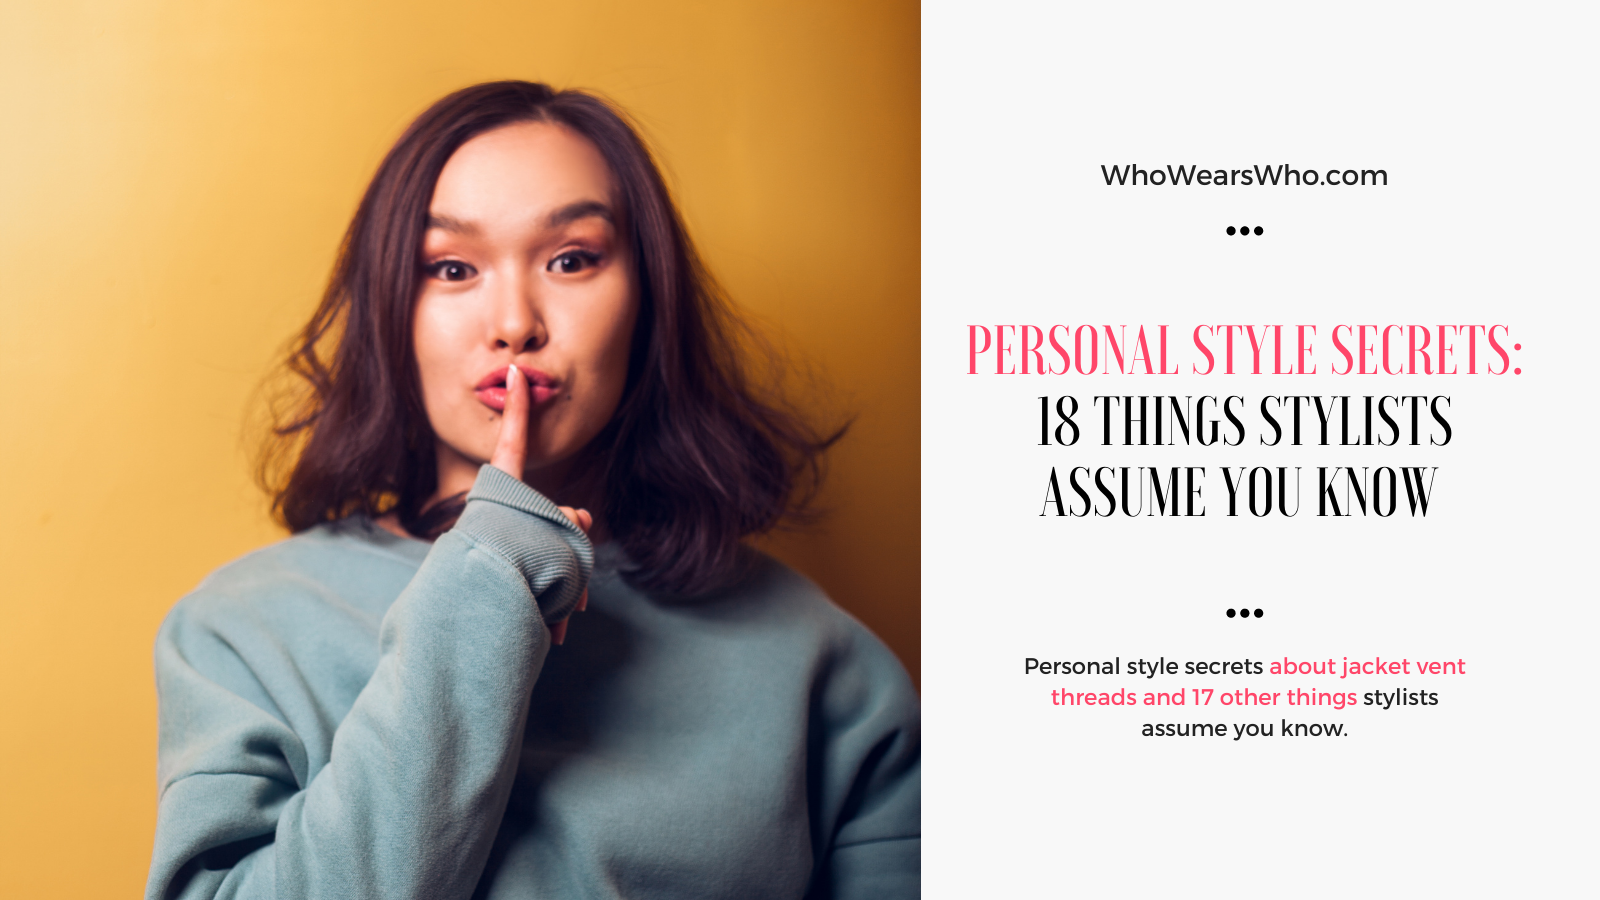 Personal Style Secrets 18 things Stylists assume you know Twitter